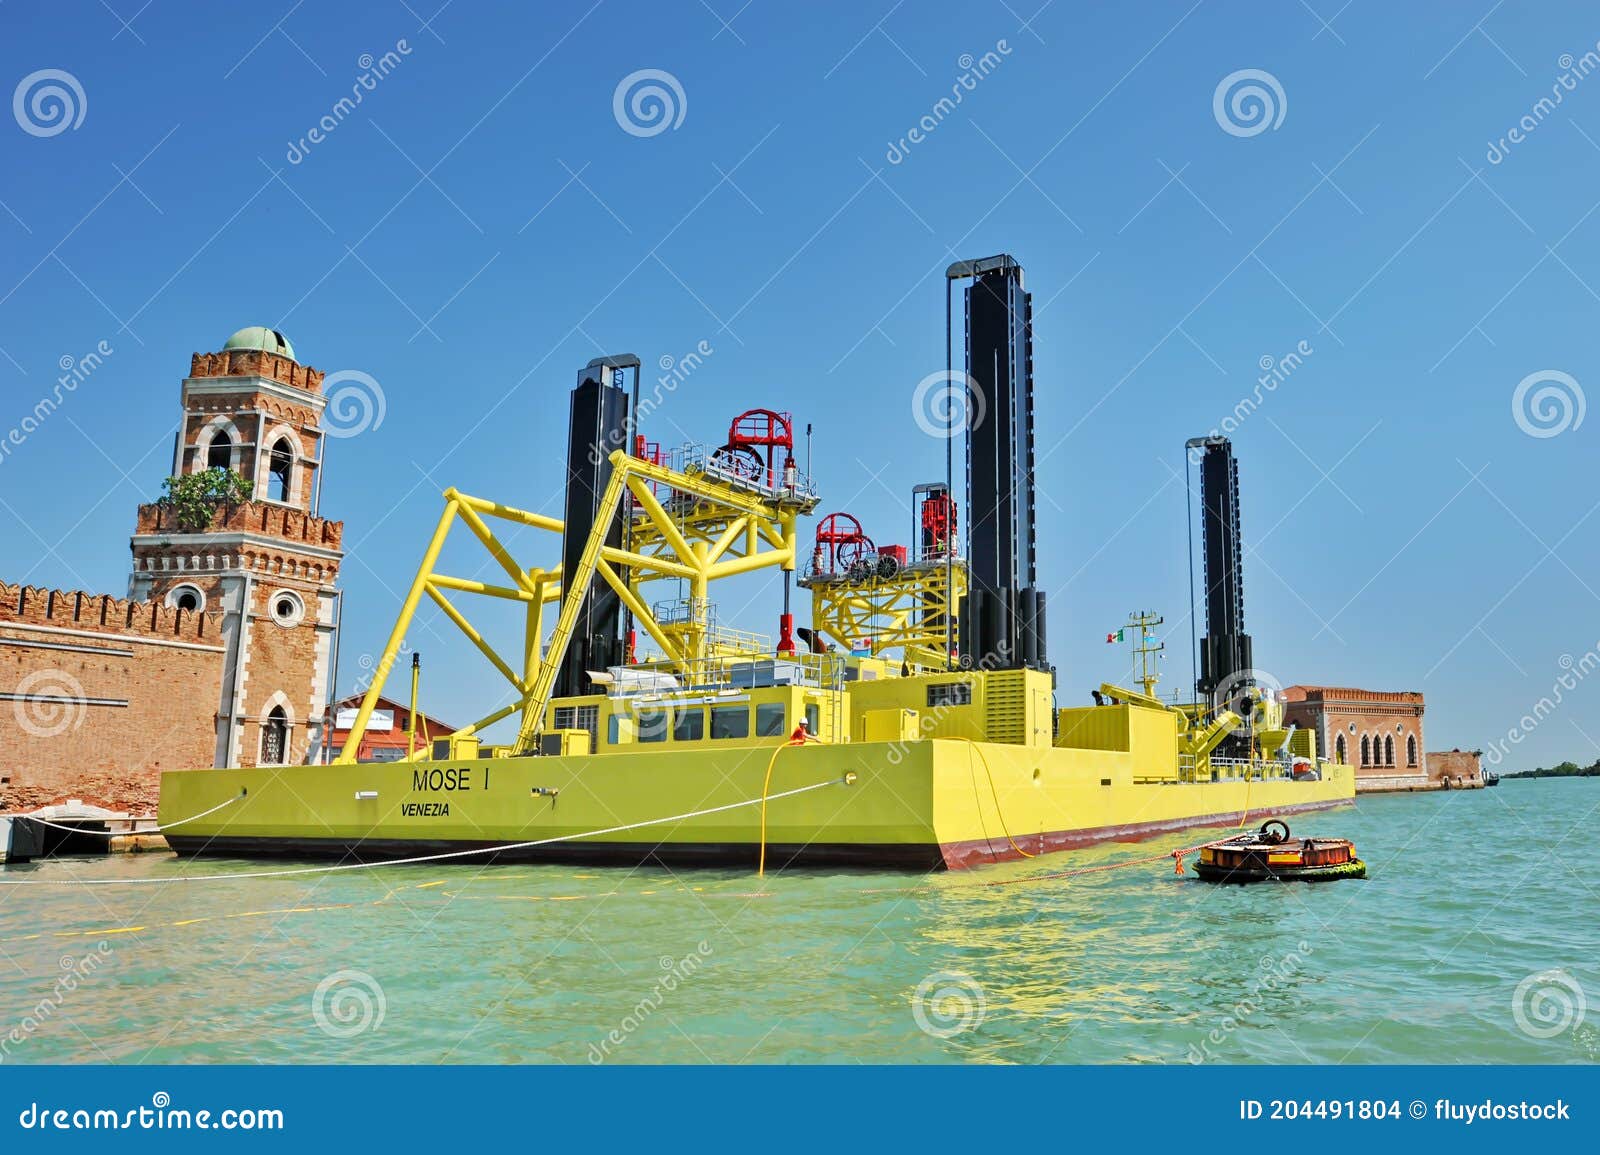 barge vessel used for construction and maintenance mose barrer in venice, italy